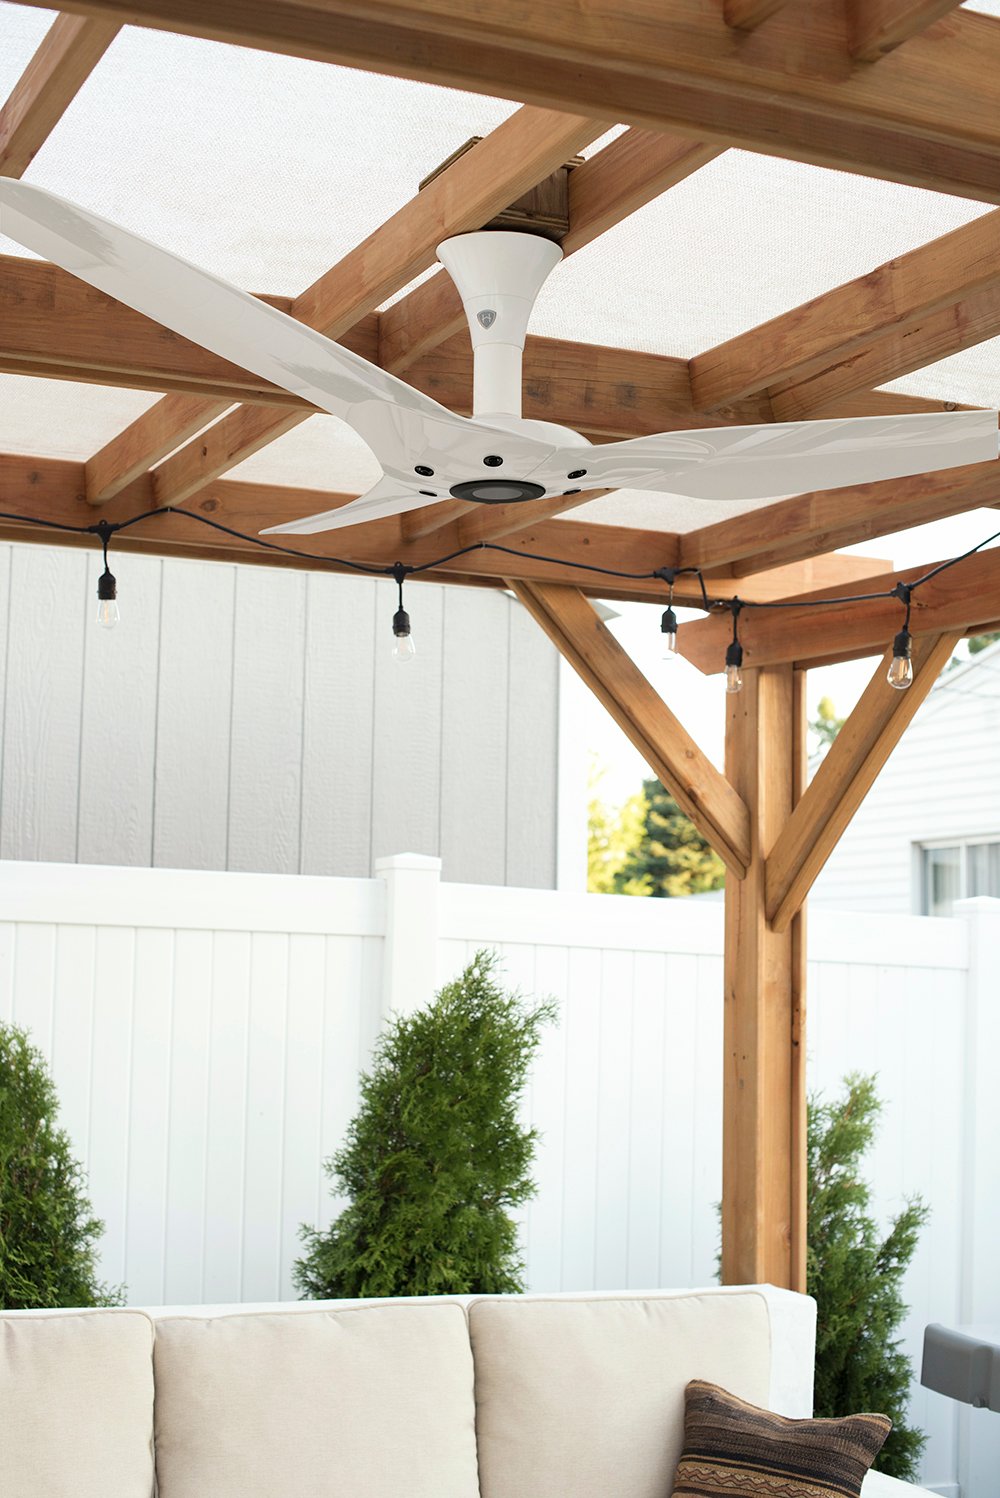 Our Outdoor Fan An Experiment, Best Outdoor Fan For Pergola